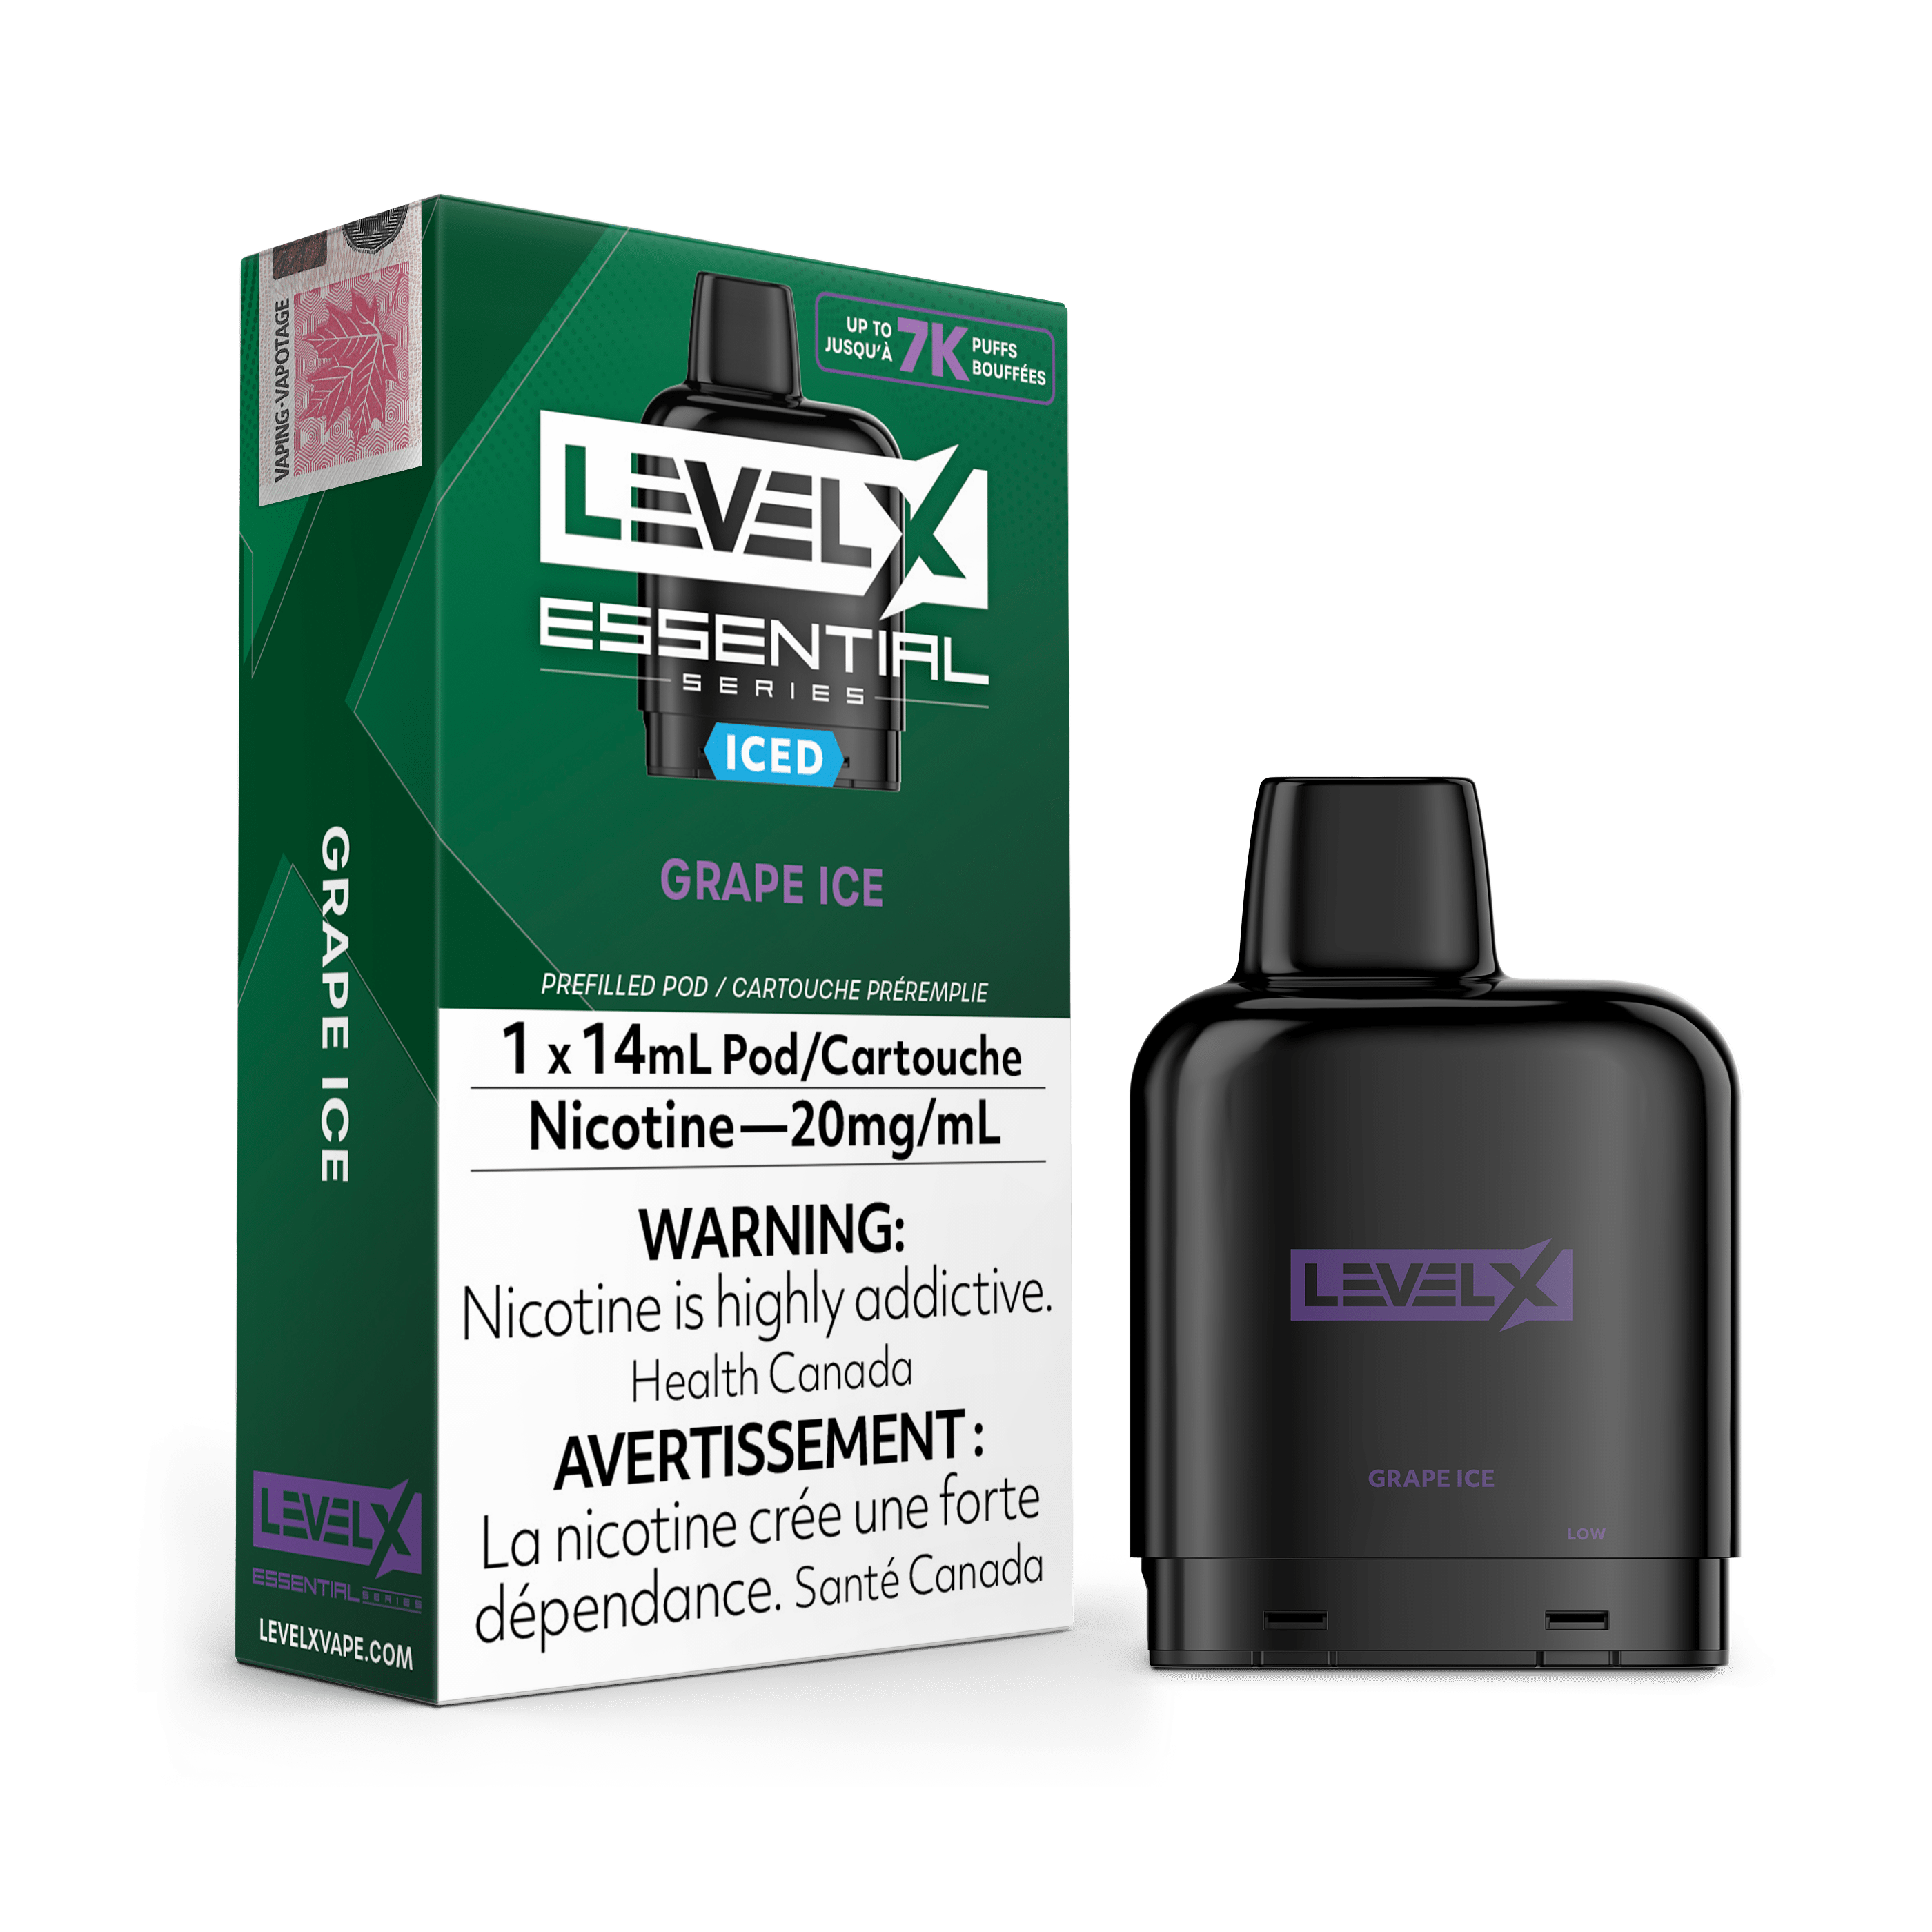 Level X Essential Series Pod - Grape Ice available on Canada online vape shop